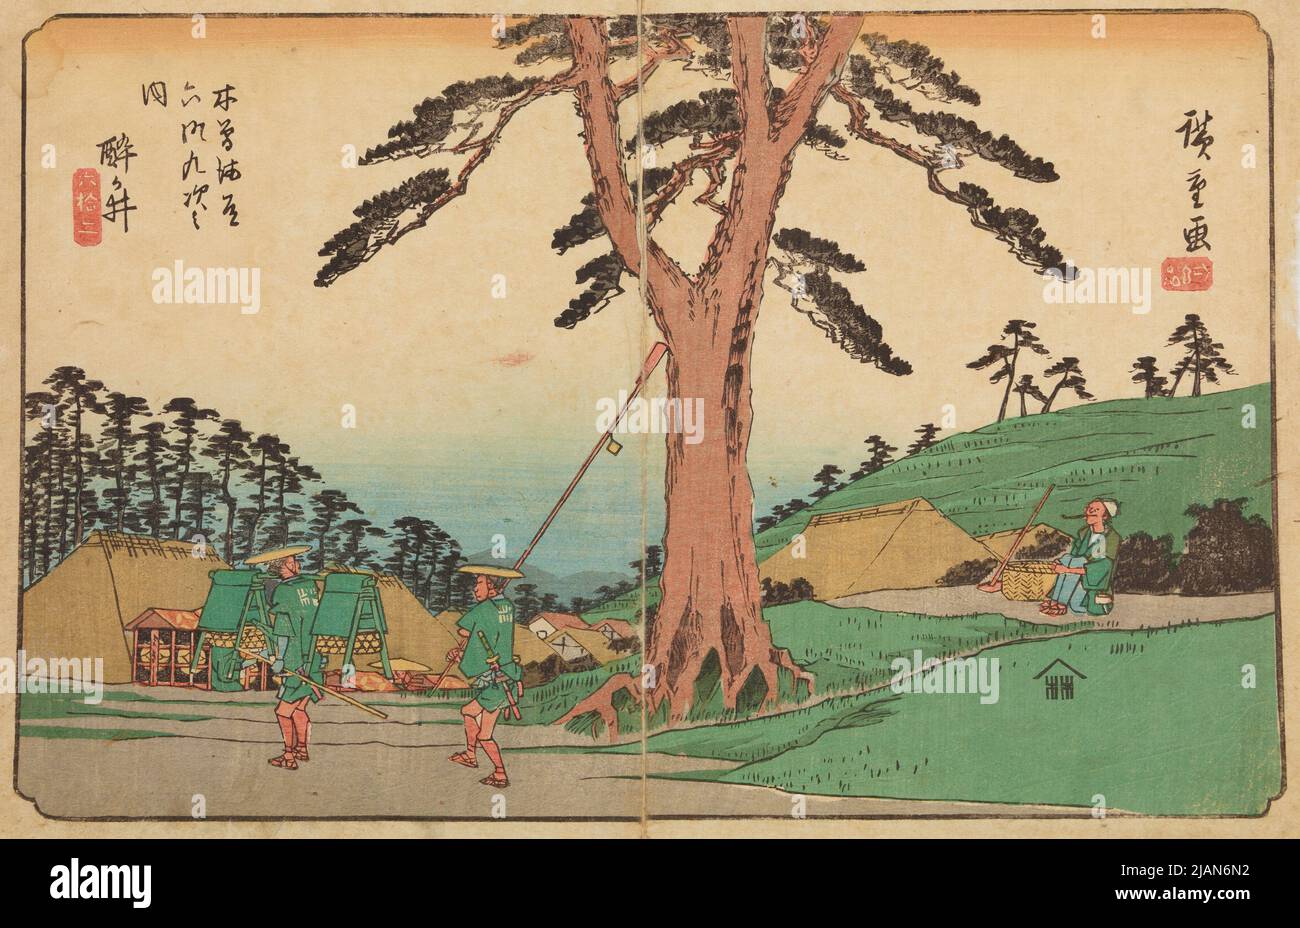 Samegai, passers by on the road in front of the village, board 69 from the series: Sixty nine stages of the Kisokaido Road (mountainous, inner road from Mino to Shinano) /Kiso Kaido rokuju ku zugi Stock Photo